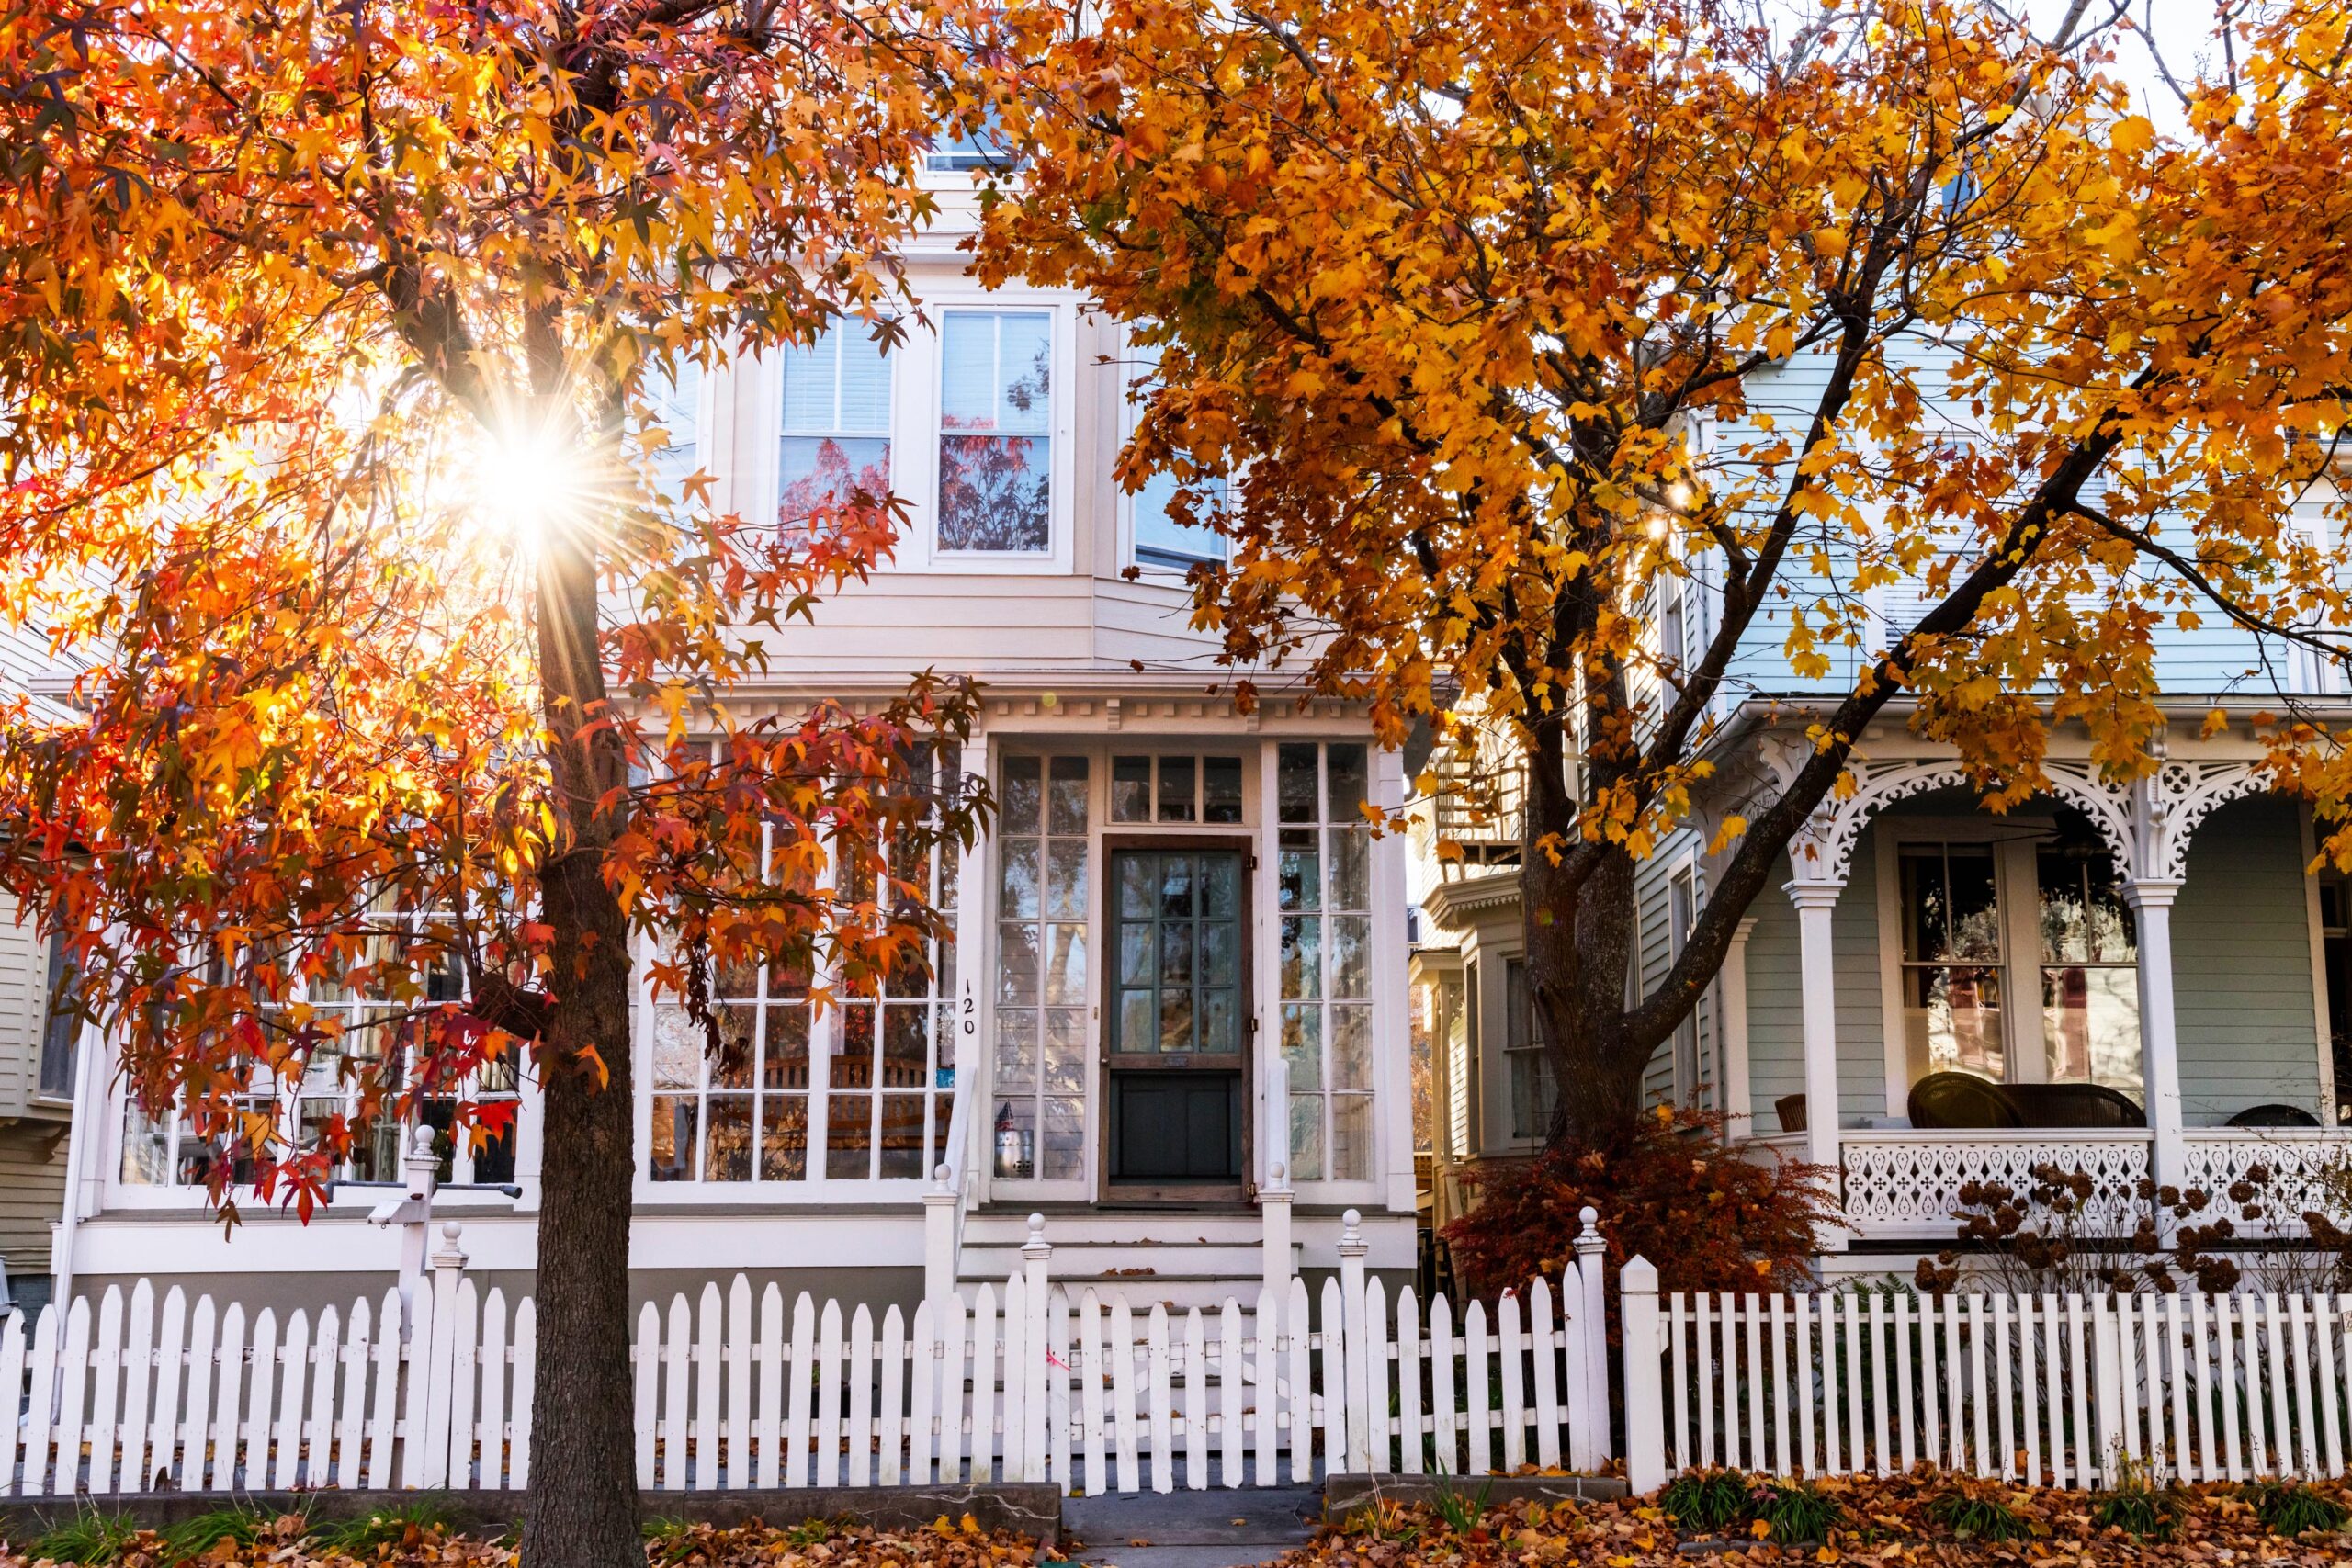 The sun shining behind Victorian houses and trees with red and orange leaves.